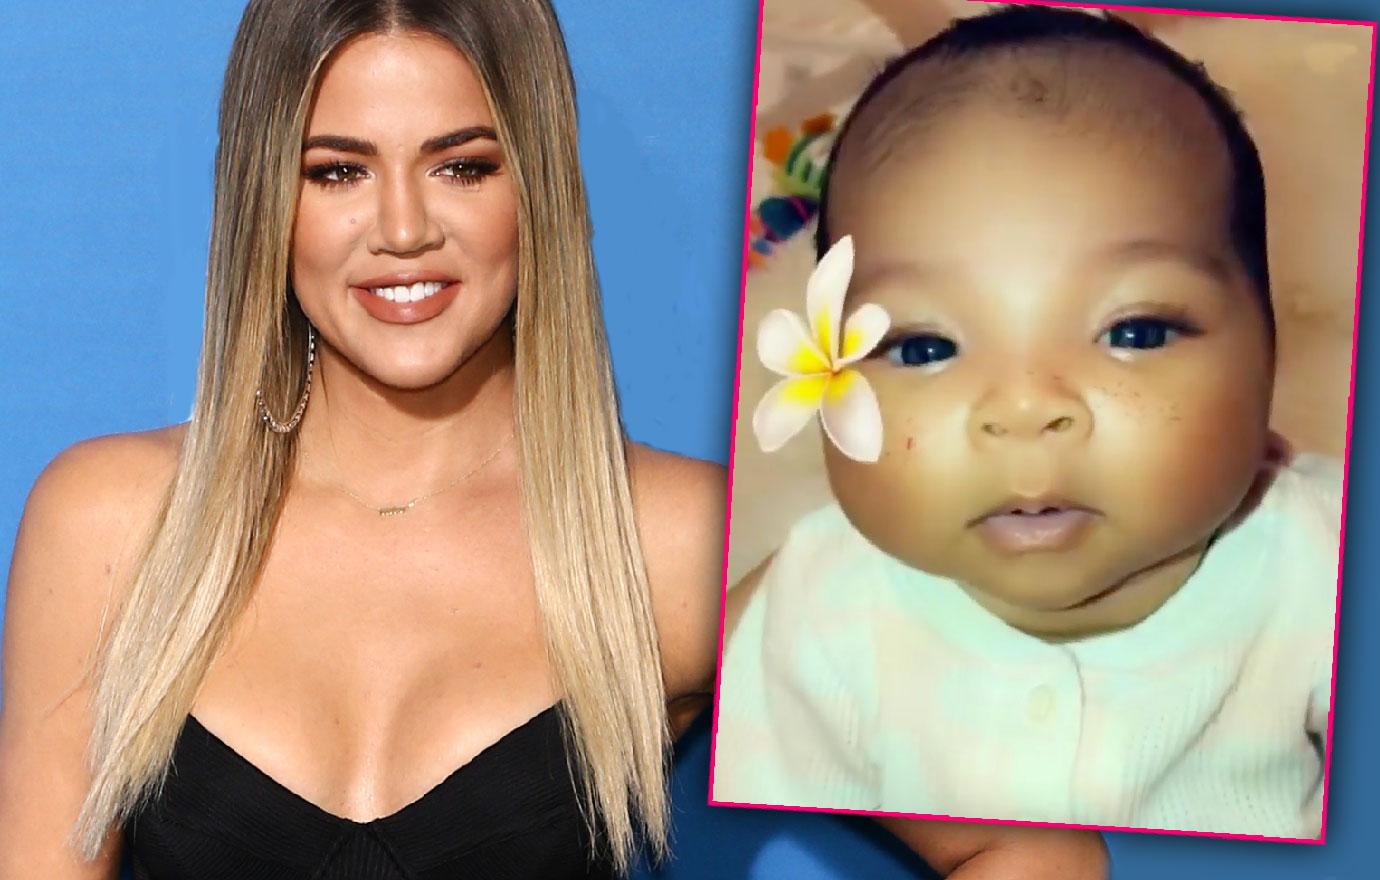 Khloé Kardashian Just Had a Baby; Here are Some Pics of Her